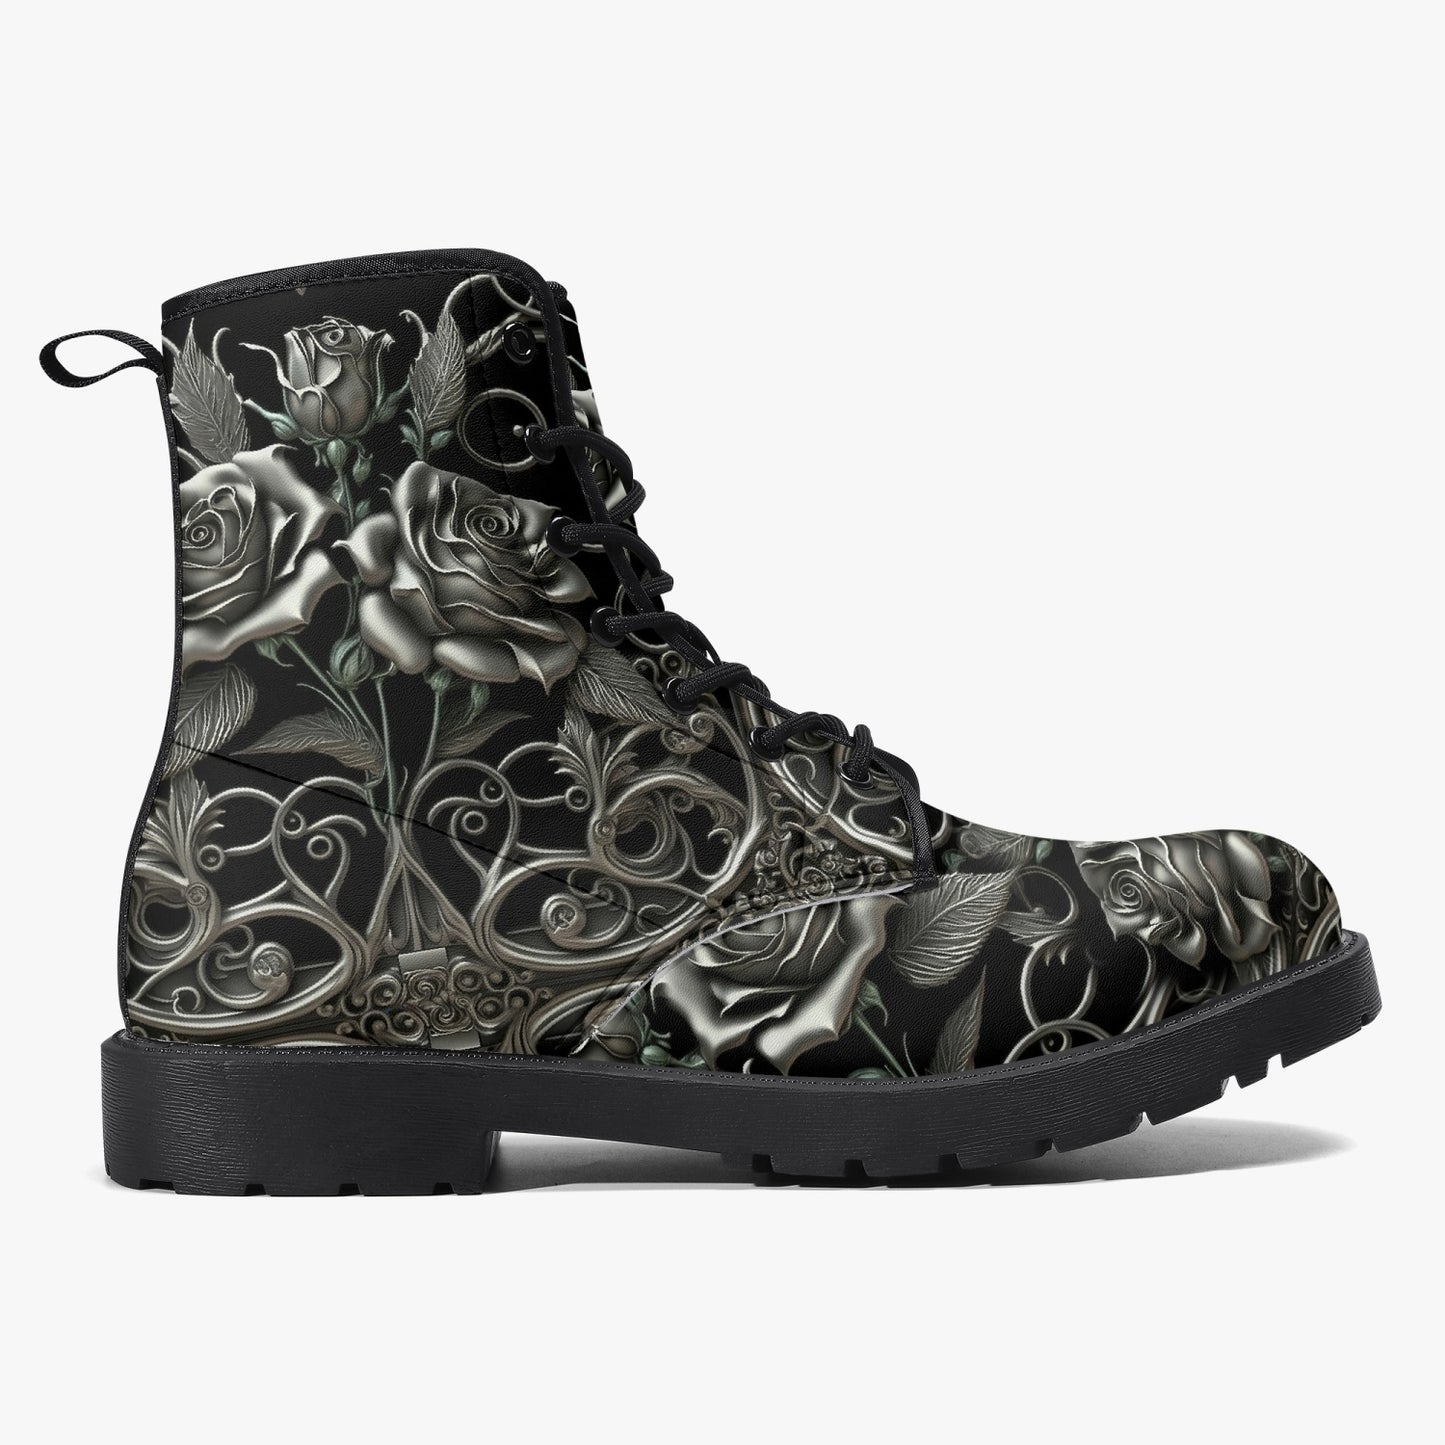 Black and Silver Filligree Roses Gothic Boots - (JPREGAISF)